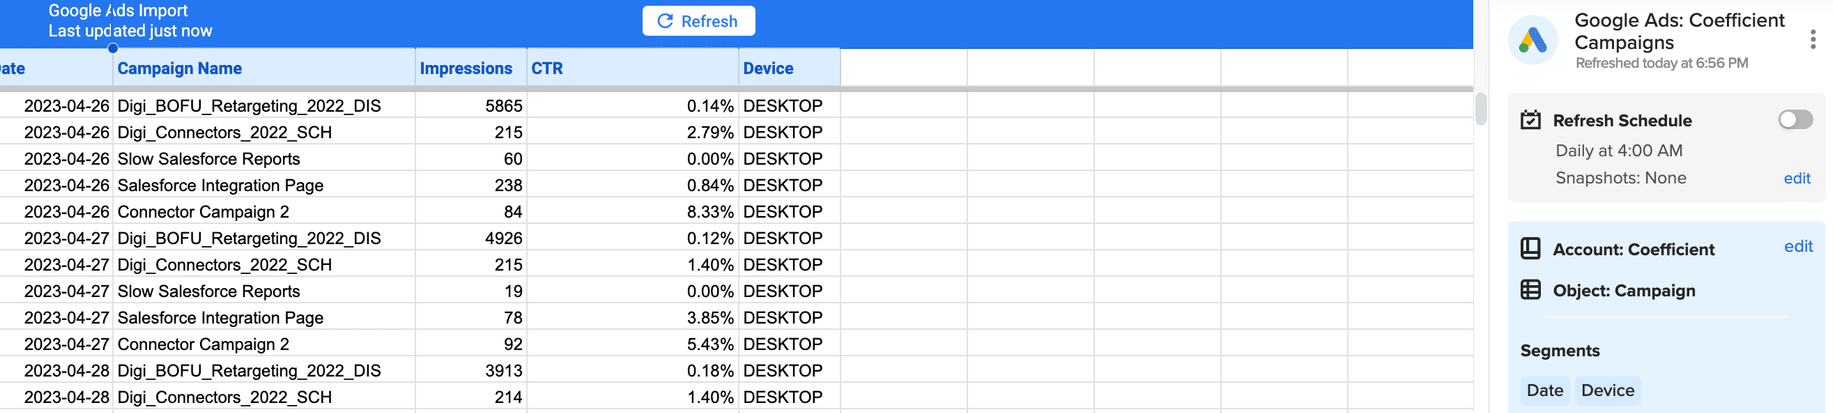 Screenshot of the final 'Import' step to import Google Ads data to Excel using Coefficient, with 'Refresh Preview' option used.